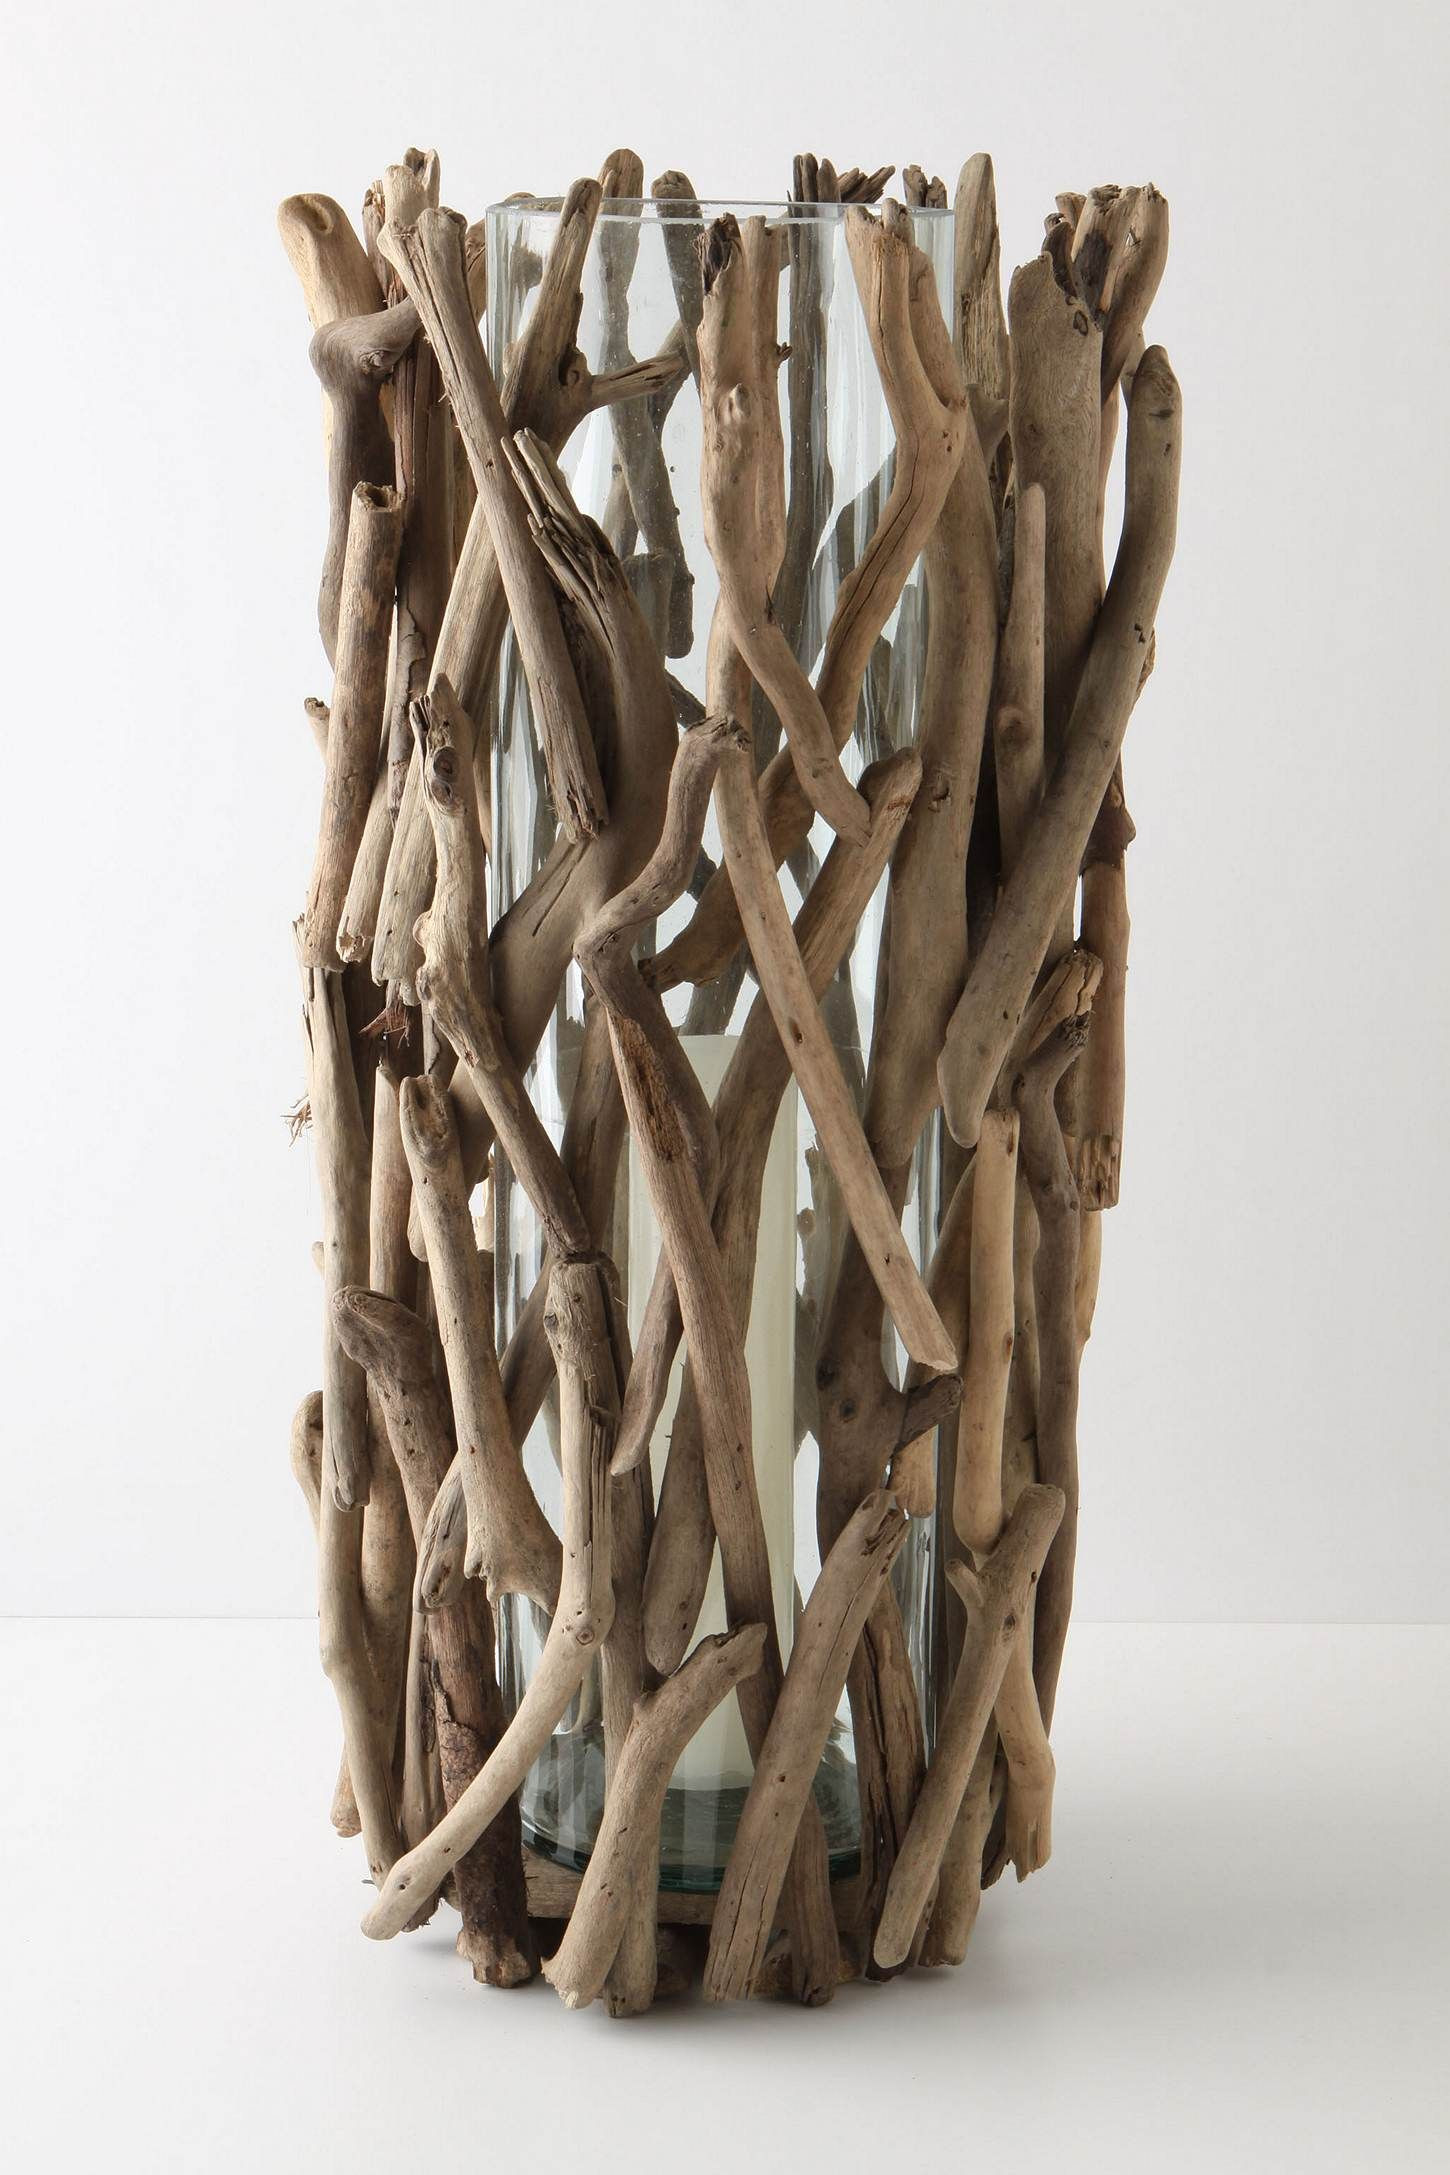 19 Lovable Natural Branches for Vases 2024 free download natural branches for vases of driftwood hurricane tall well isnt that just nifty pinterest regarding driftwood hurricane tall 78 place this on your coffee table make your own using a clear g